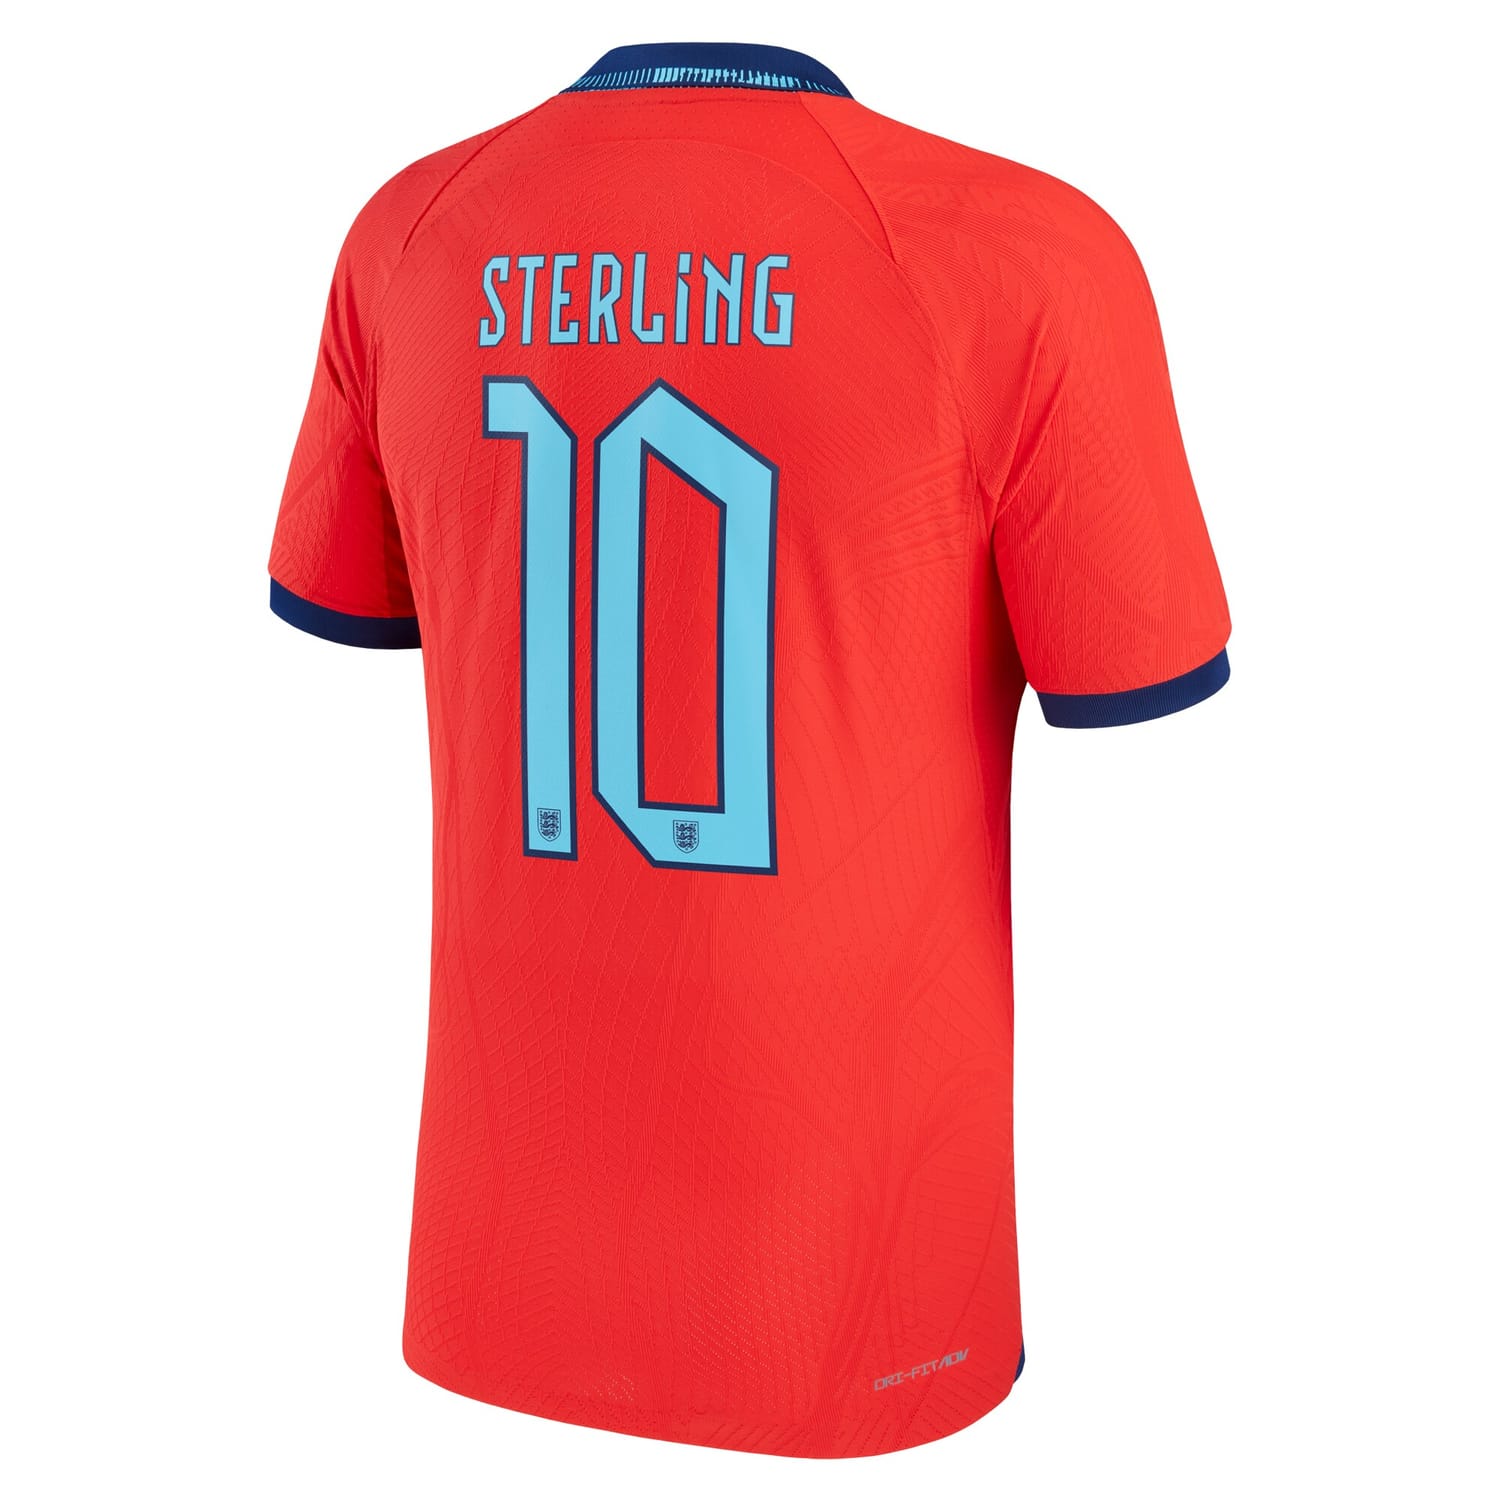 England National Team Away Authentic Jersey Shirt Red 2022-23 player Raheem Sterling printing for Men